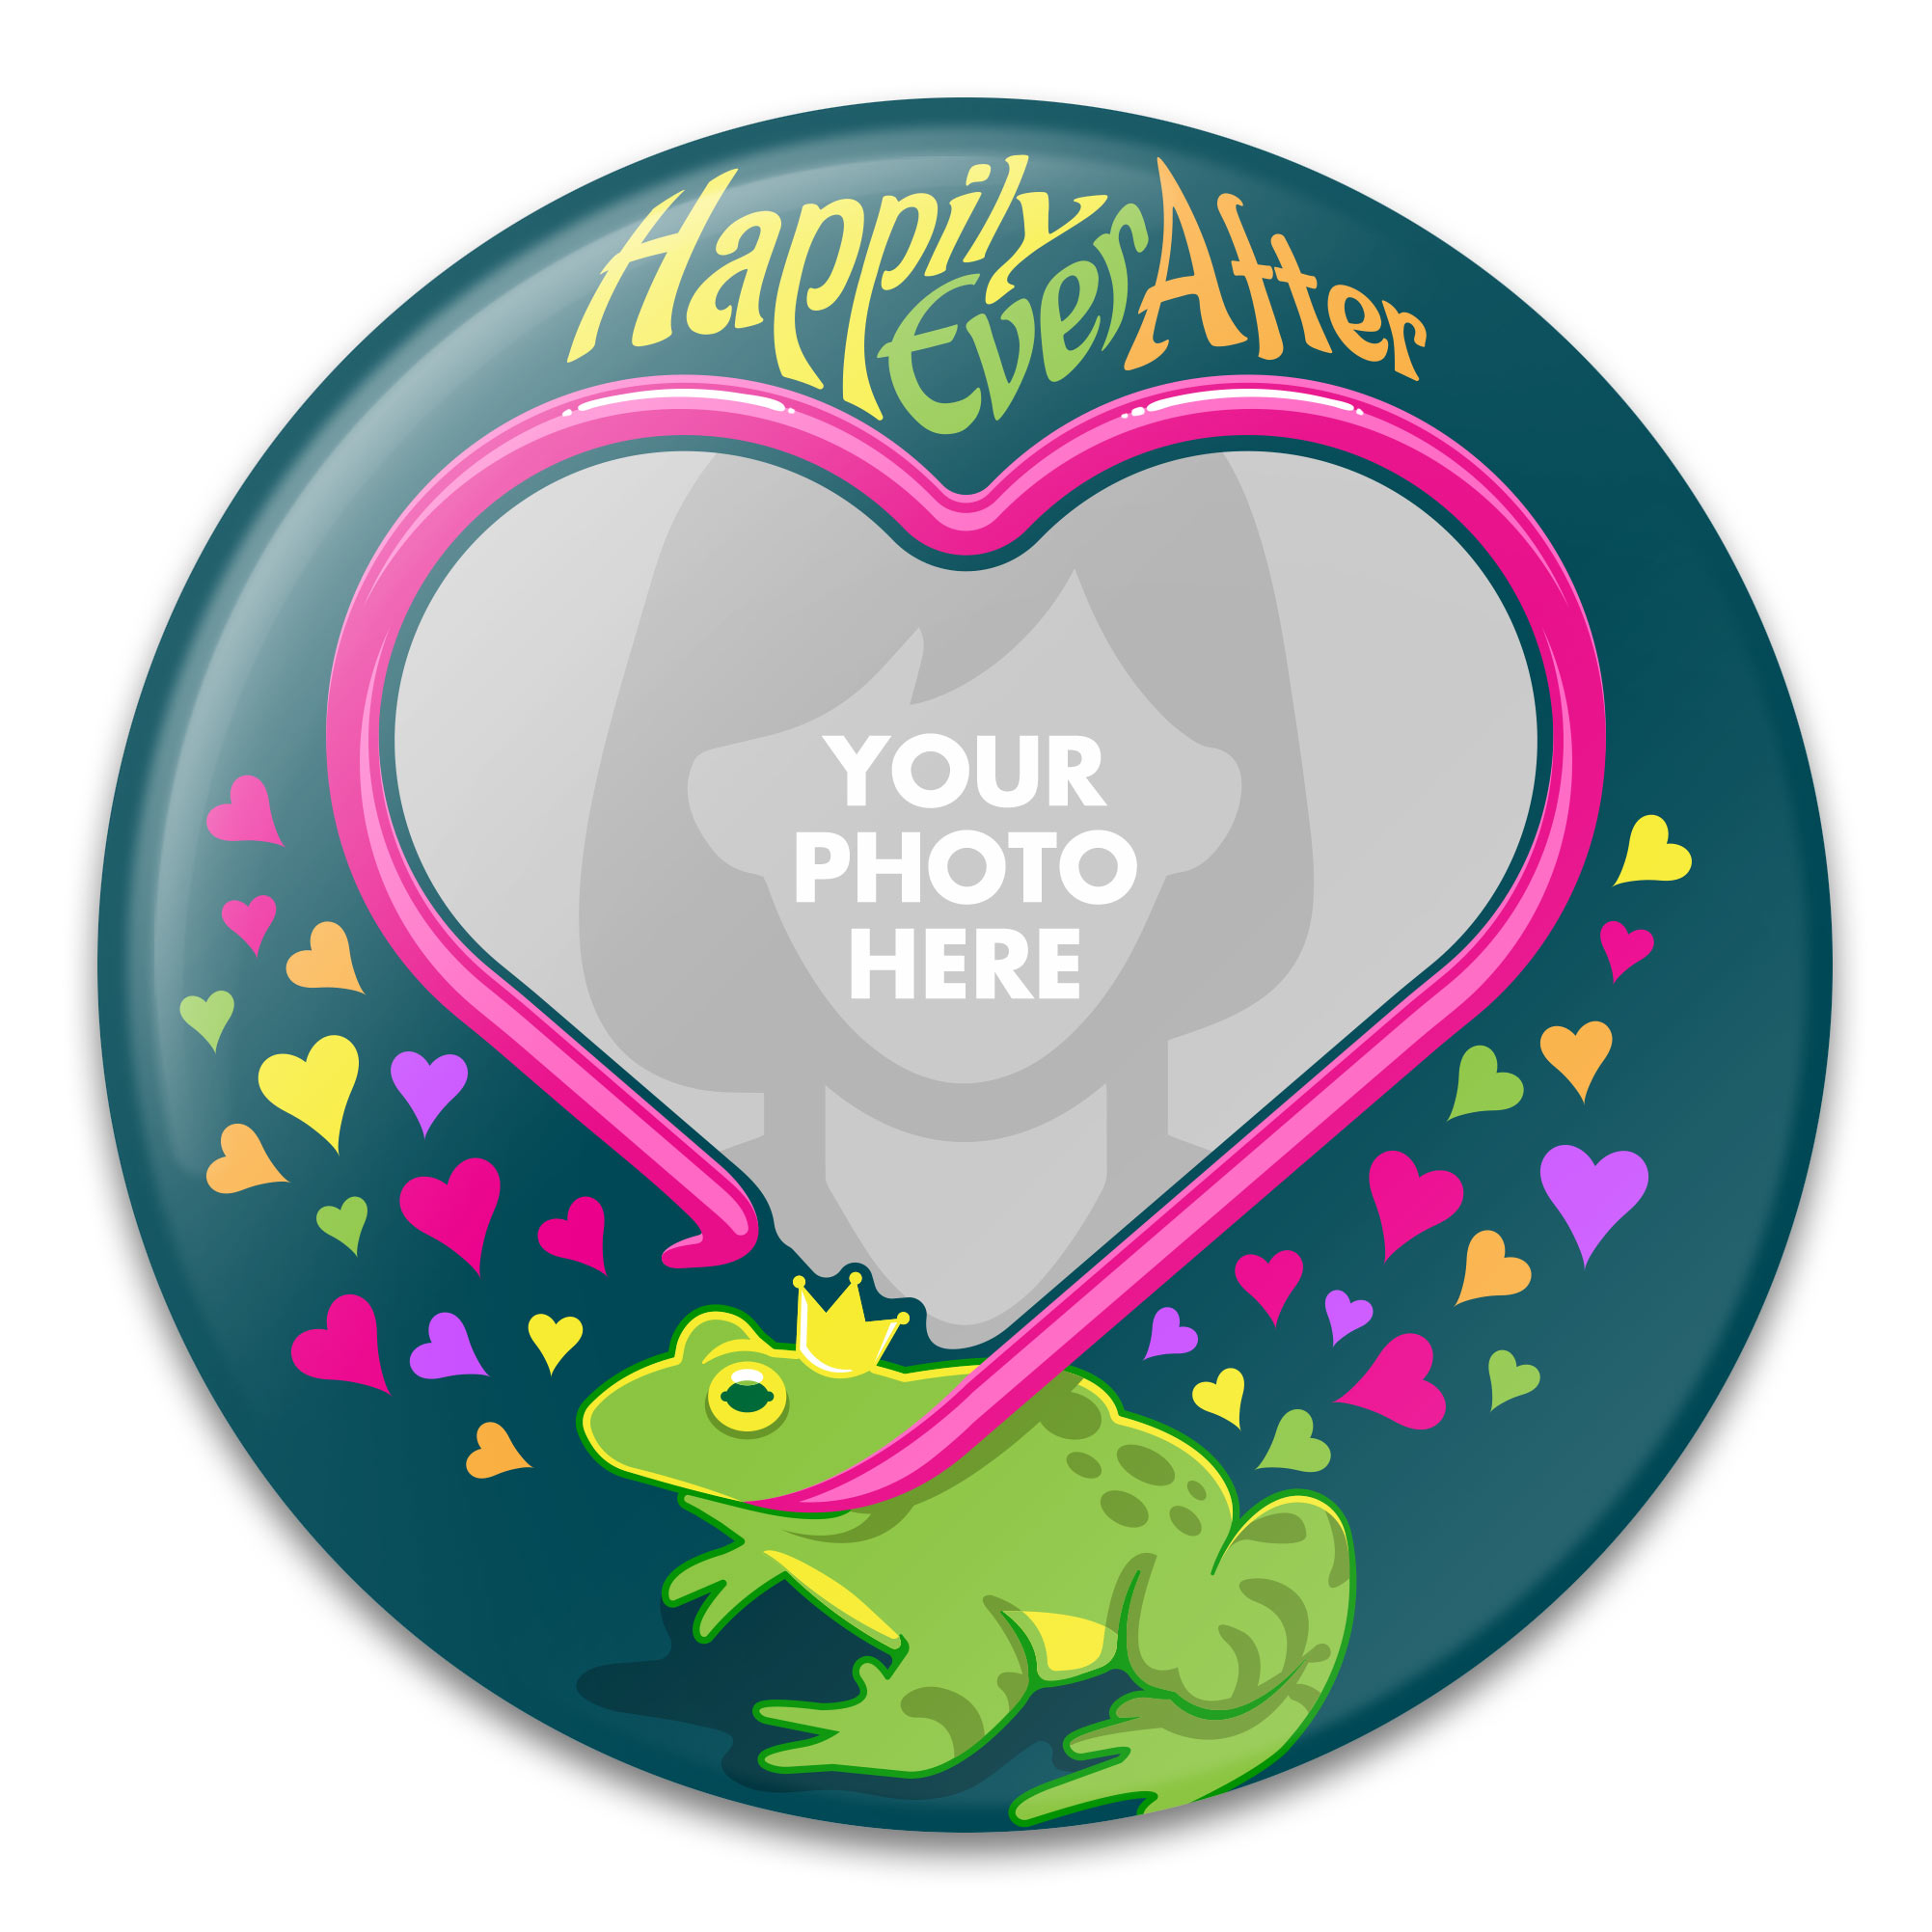 Happily Ever After - Valentine's Day Photo Gift Design